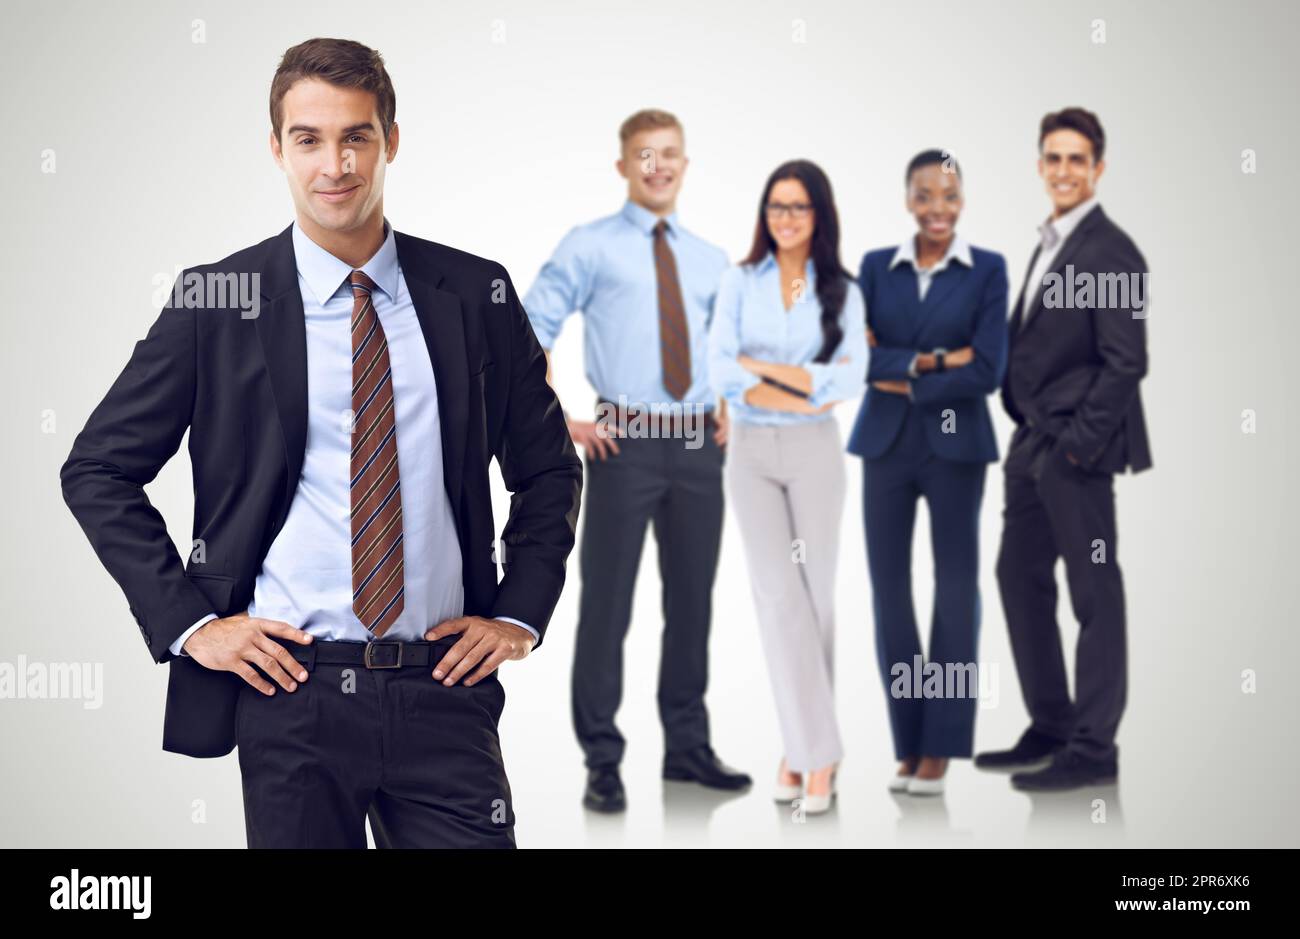 Unity through business diversity. Studio shot of a businessman with his hands on his hips standing in front of her colleagues. Stock Photo